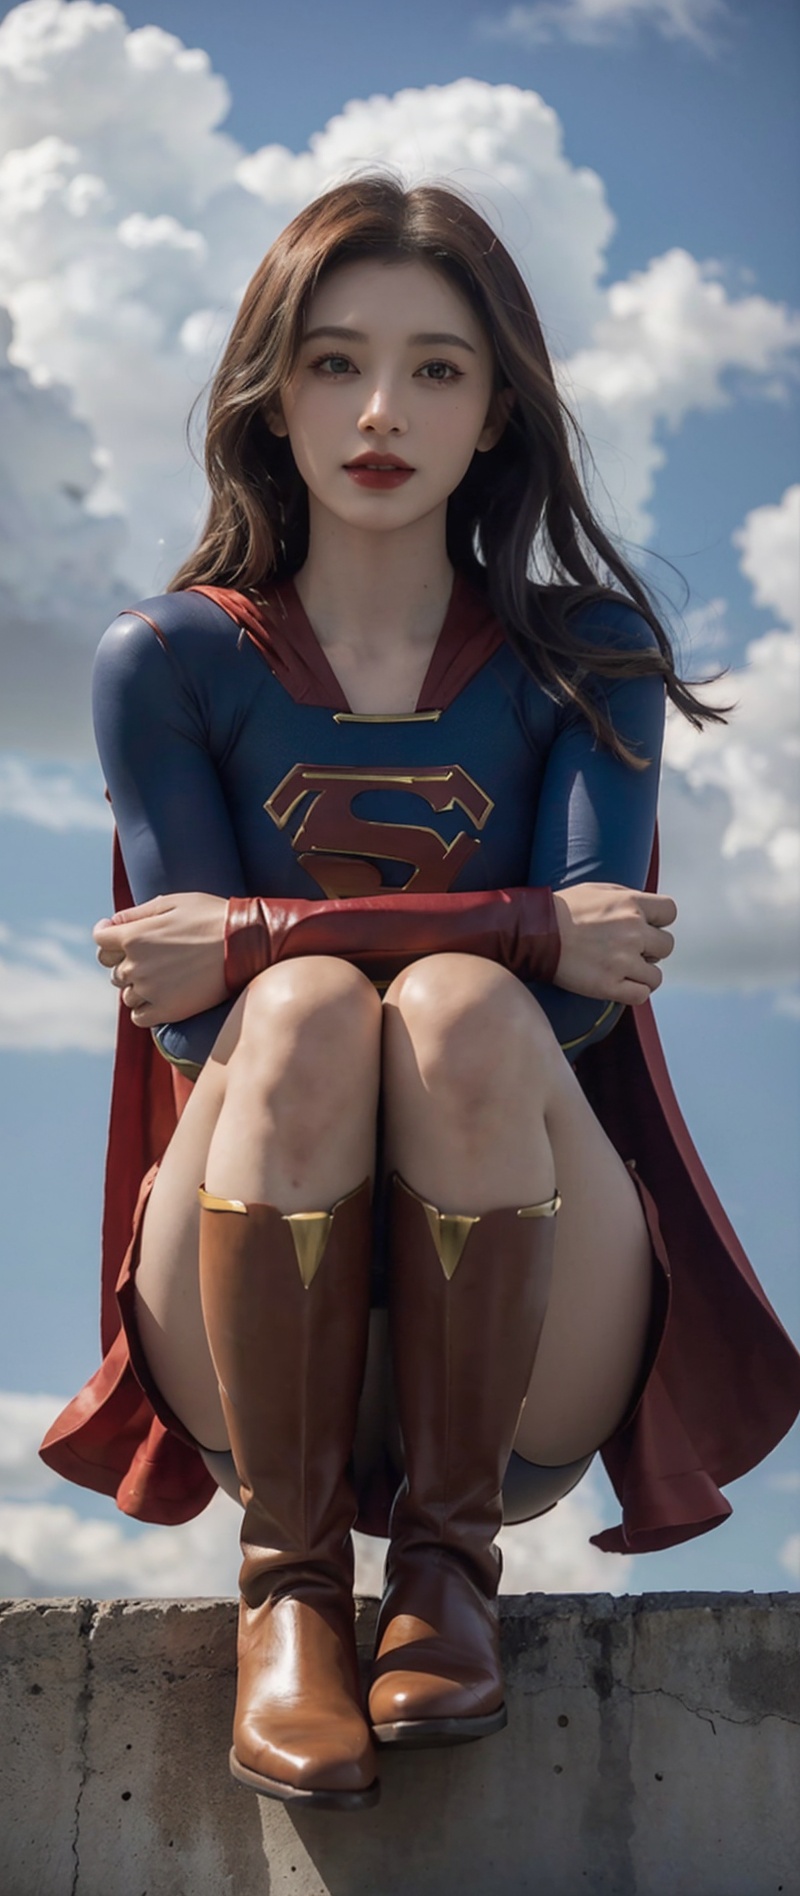  a hero supergirl ,25 age , green eyes , long brown hair , pantie , sport figure , full body , big boobs,fly in the sky with golden clouds,supergirl. Red long leg boots.,Blademancer. Clouds,Blademancer, linyuner, chakumomi